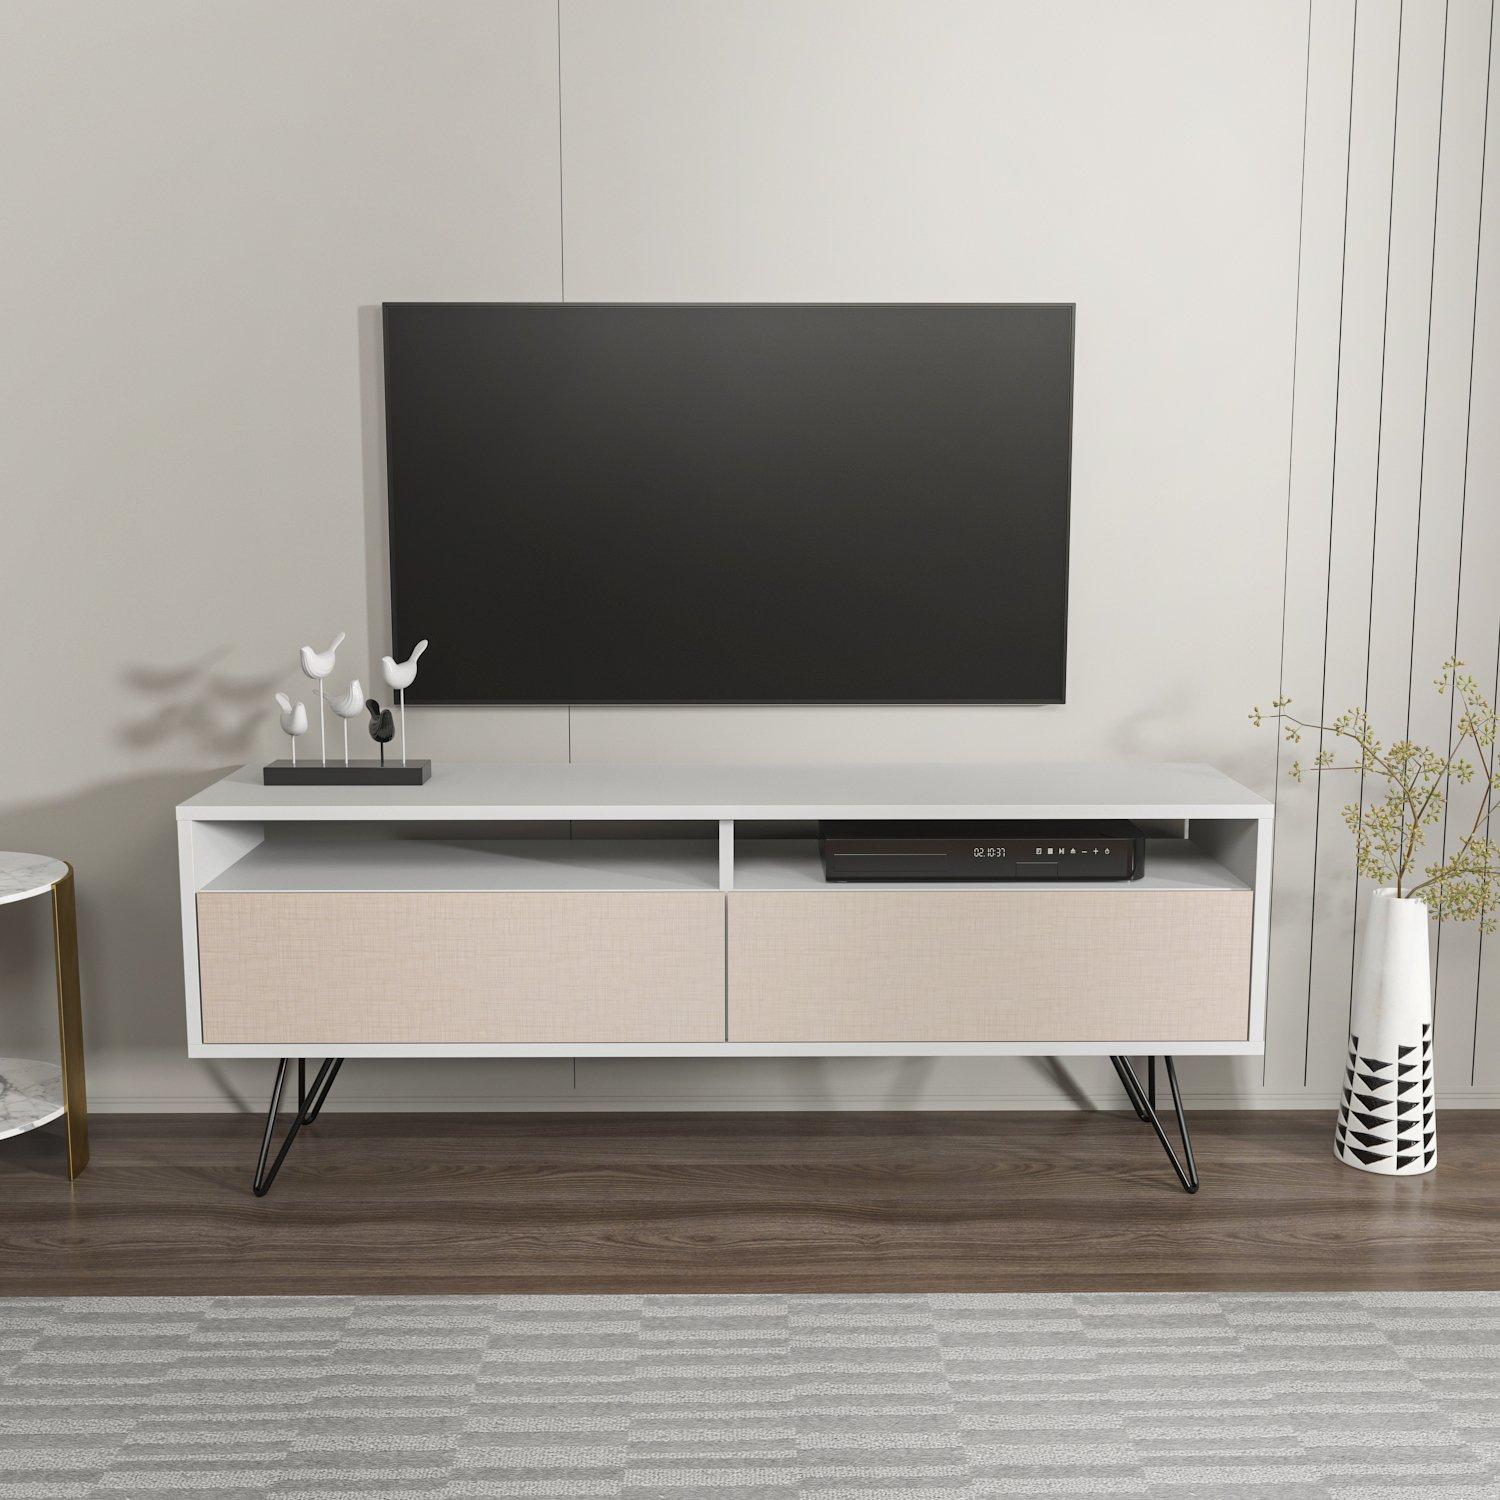 Flay TV Stand TV Unit for TVs up to 65 inches Metal Legs Dropdown Cabinets